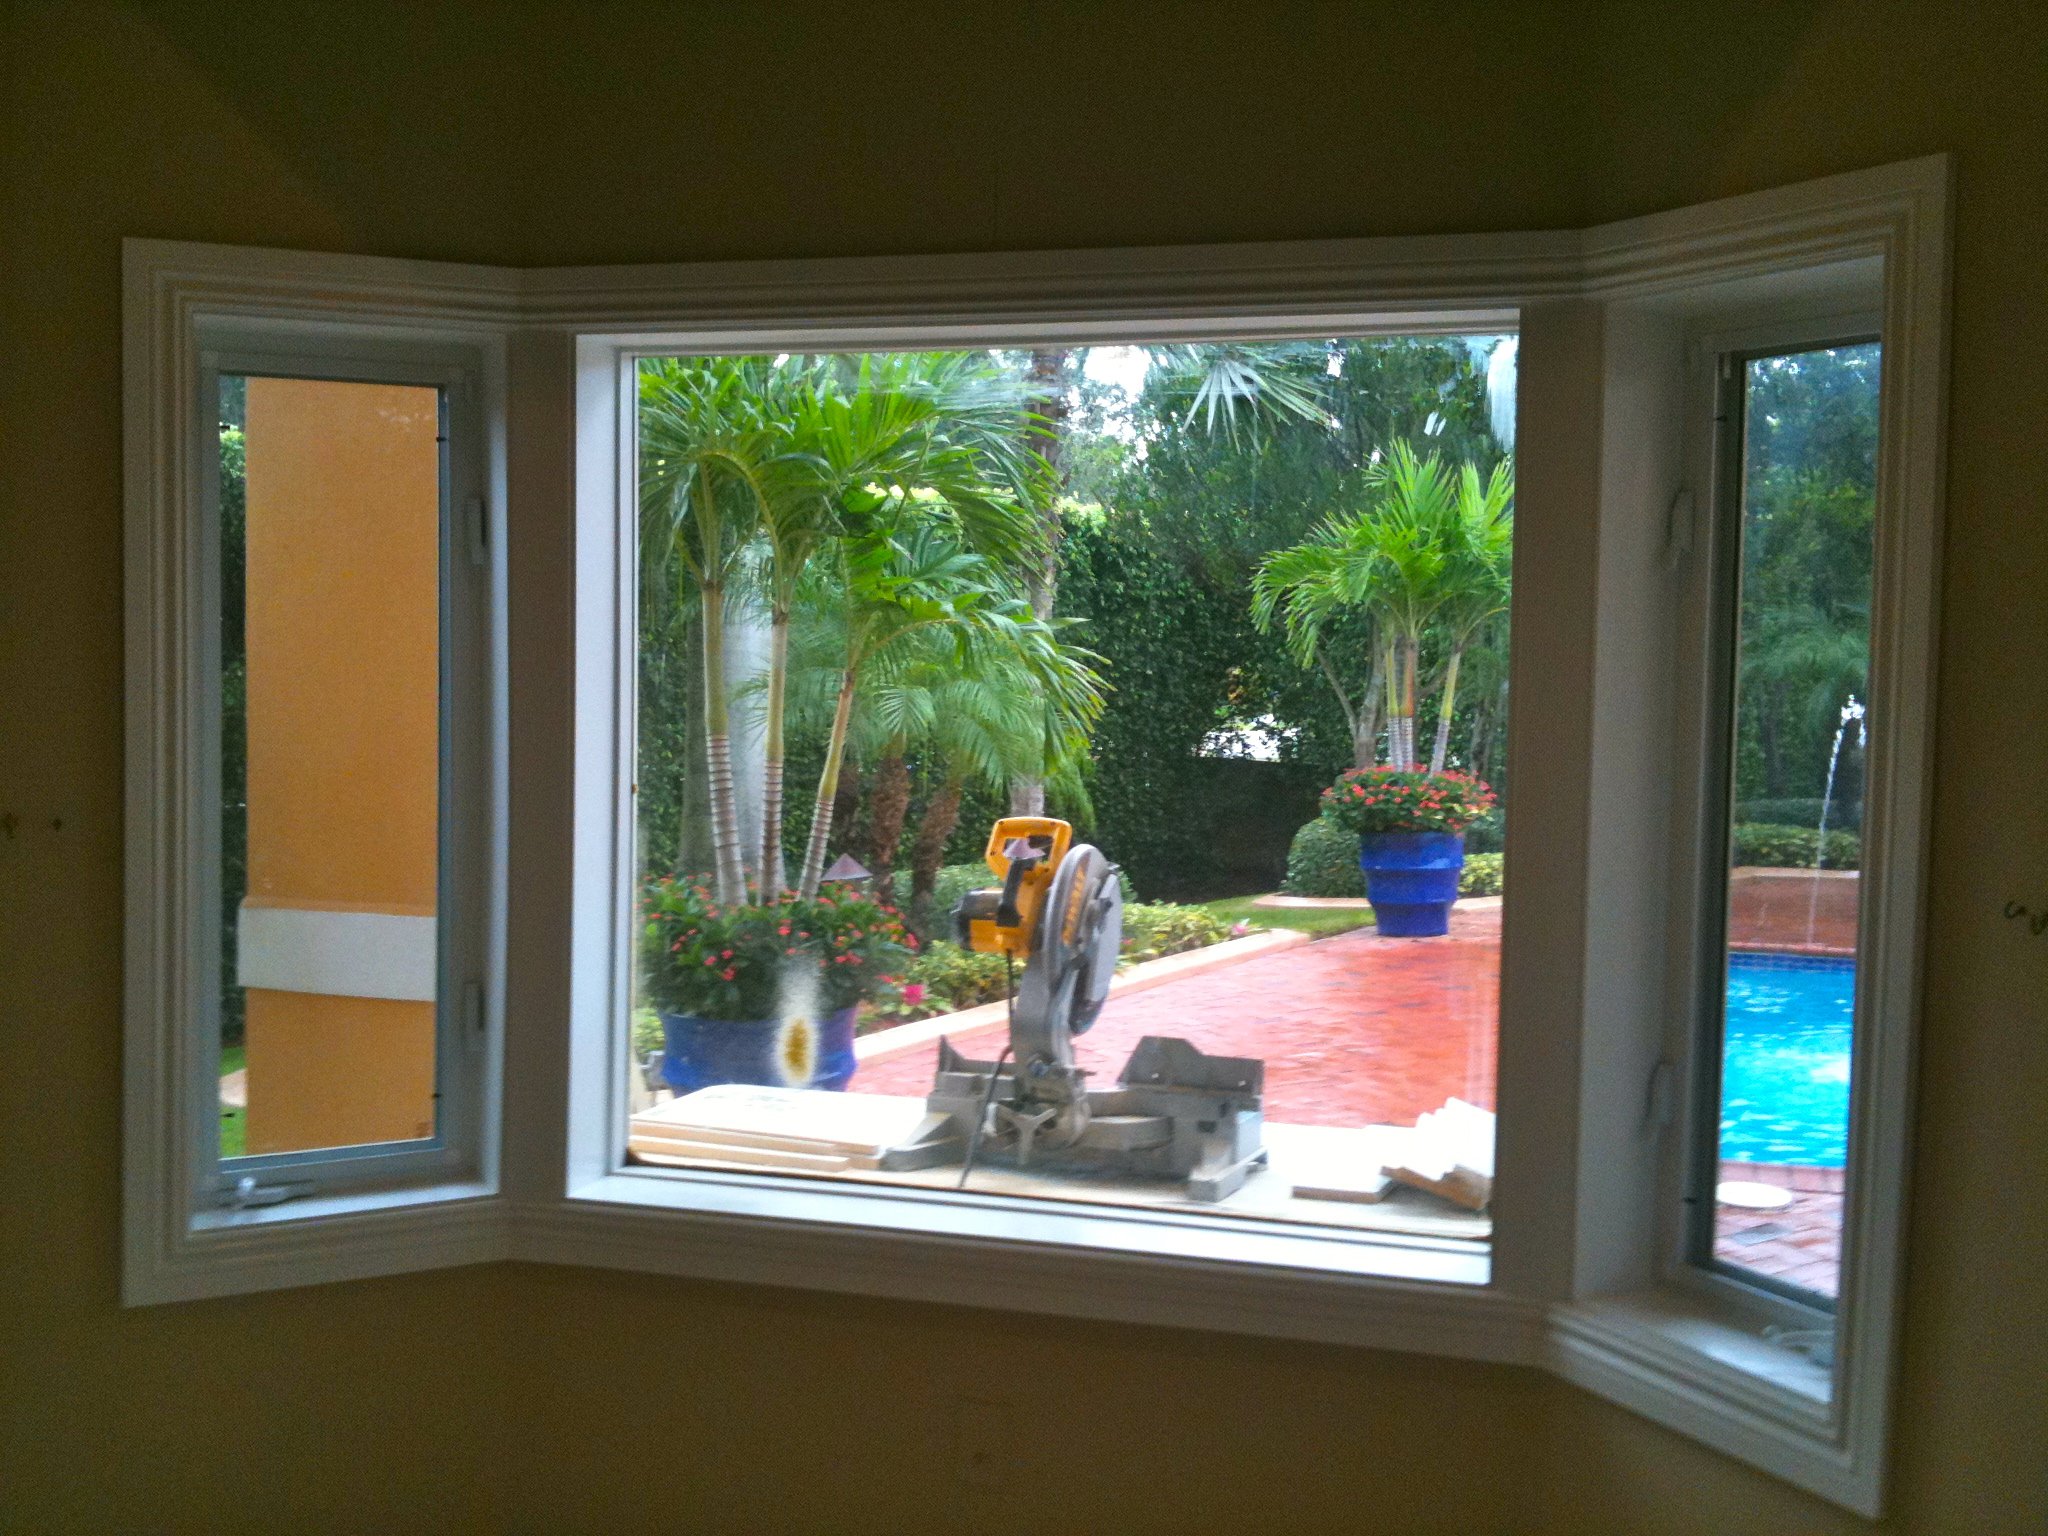 To install impact windows Miami, what is needed?